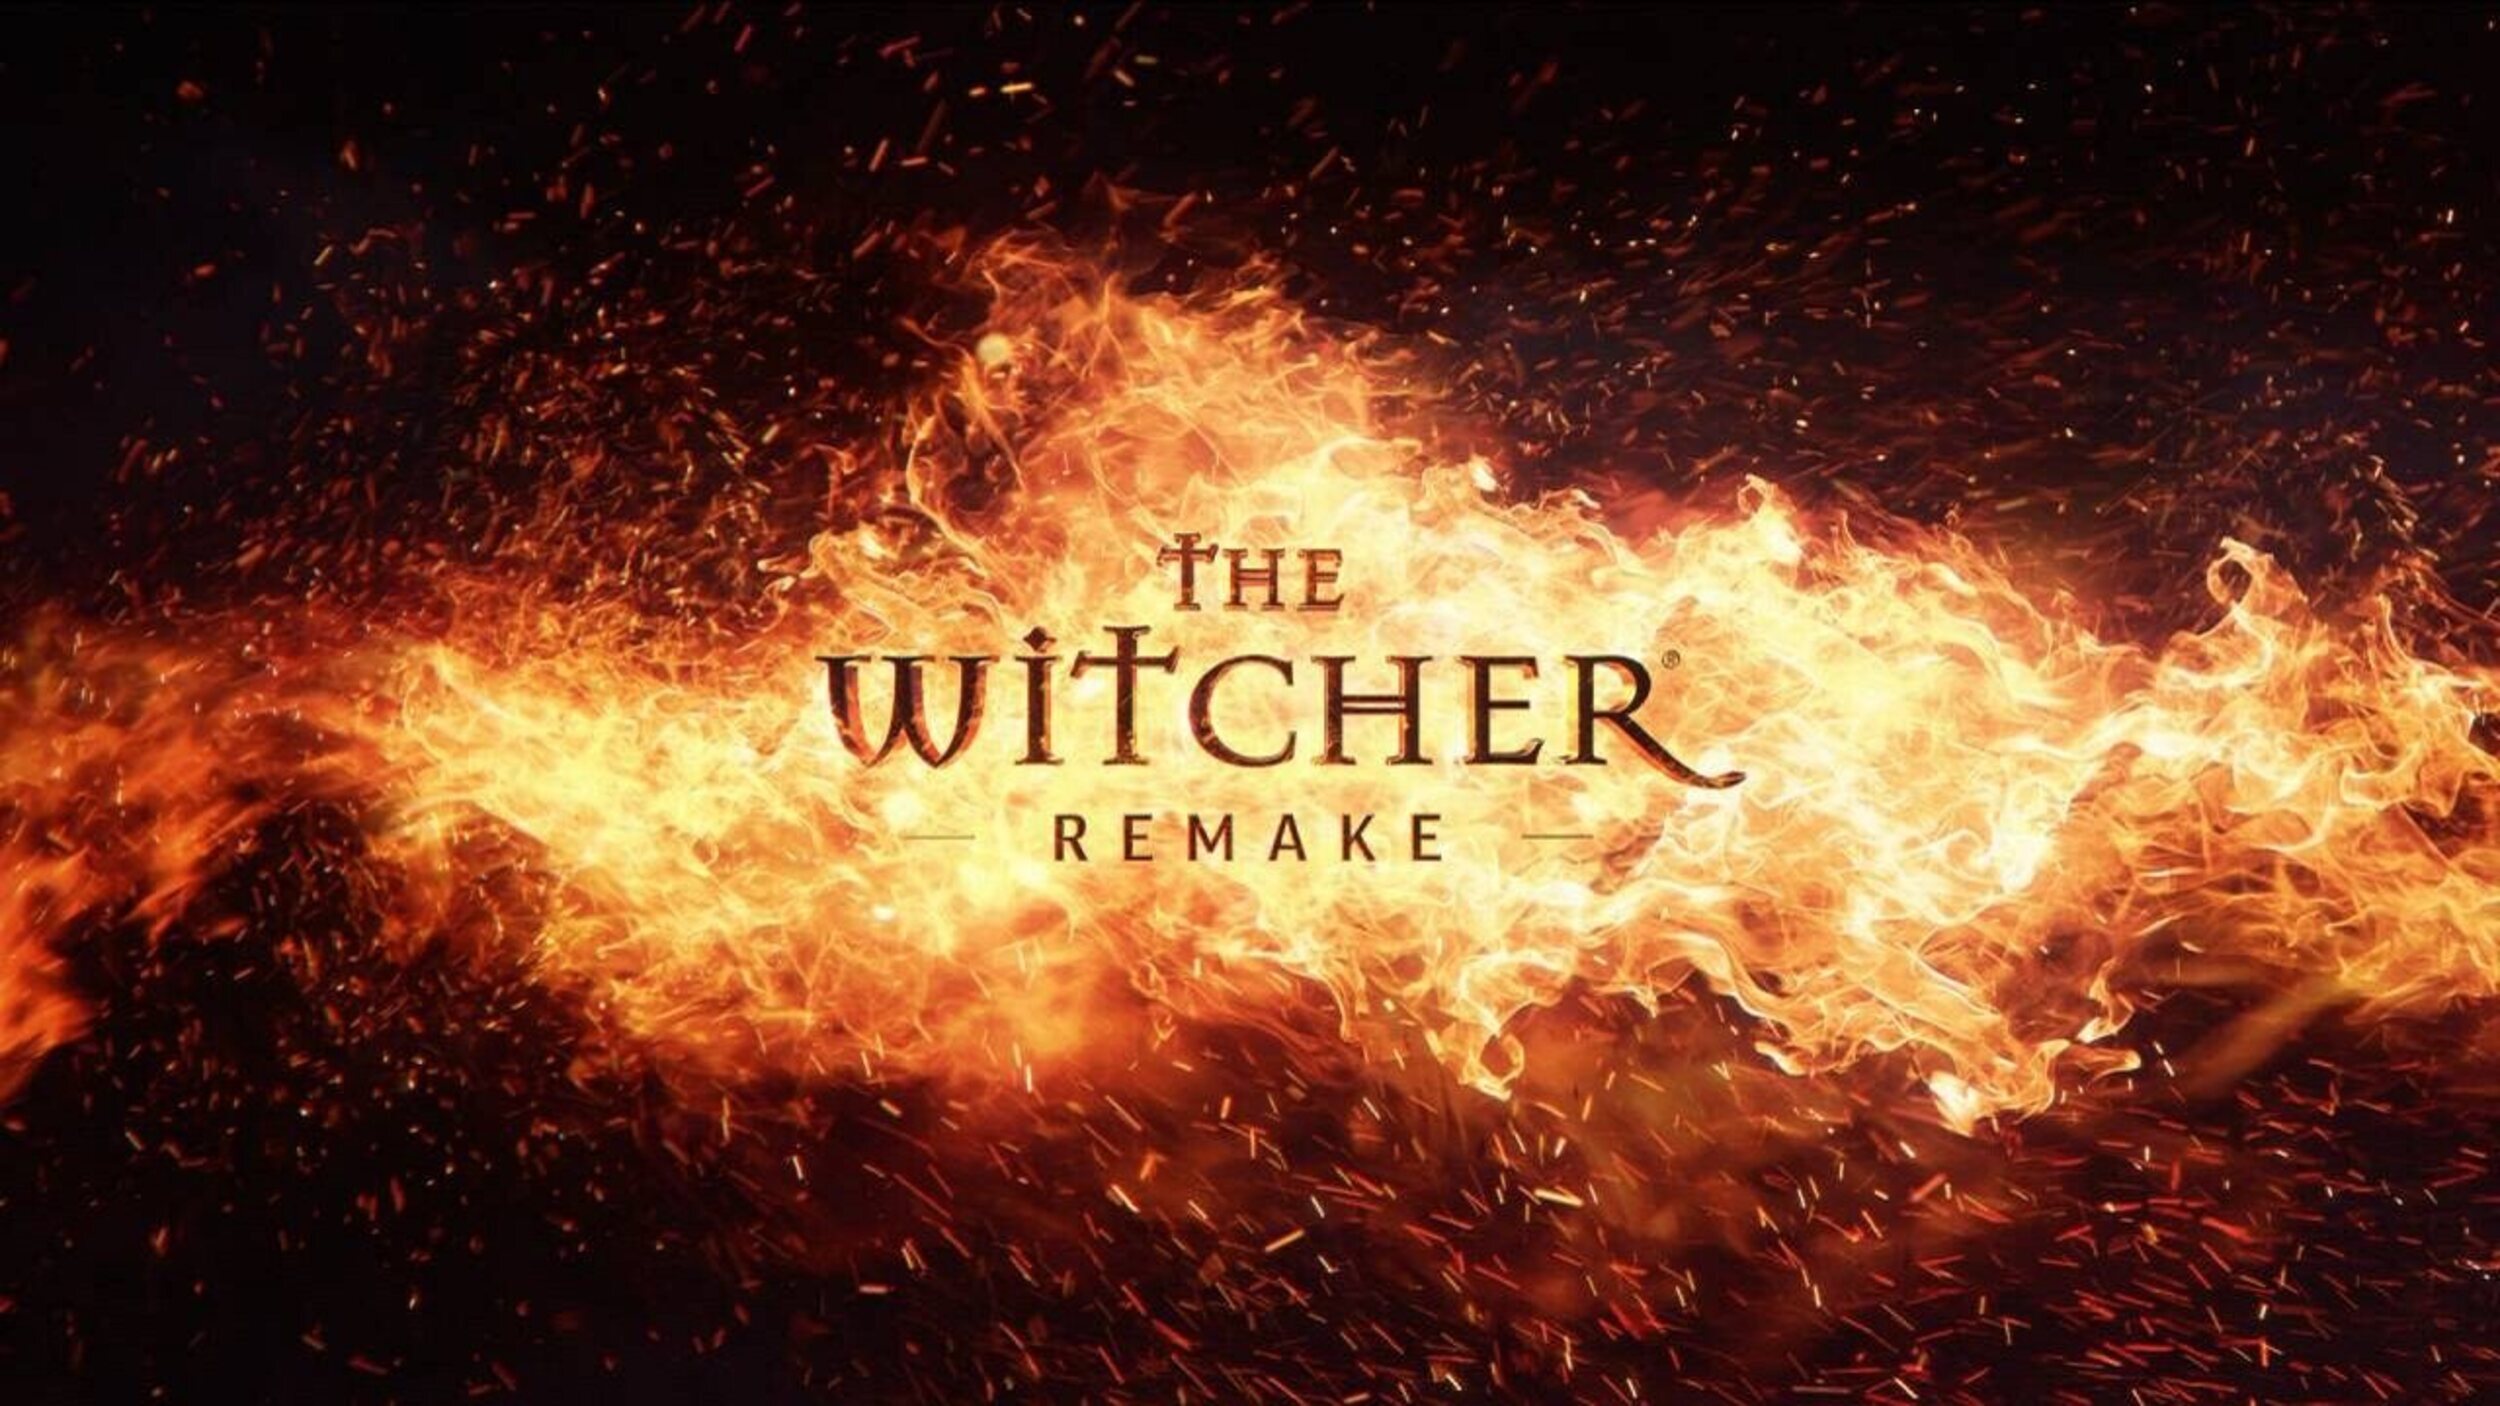 'The Witcher Remake'